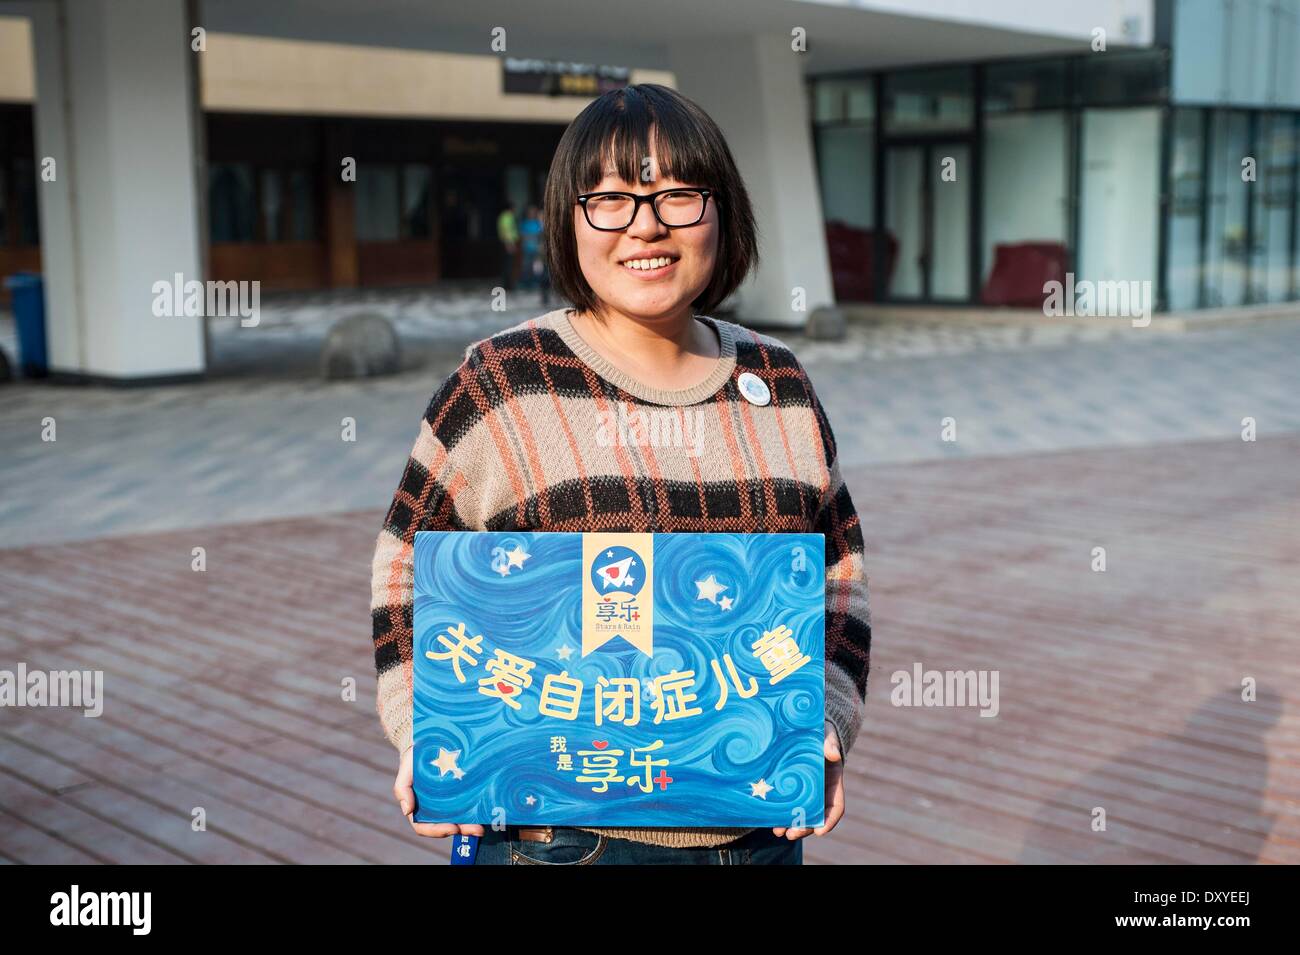 (140402) -- BEIJING, April 2, 2014 (Xinhua) -- Li Xiang, a volunteer for autistic children, holds a placard reading 'care for autistic children' in Beijing, capital of China, March 15, 2014. The World Autism Awareness Day falls on April 2, drawing attention to the pervasive developmental disorder that affects tens of millions of children around the globe.    (Xinhua/Zhang Keren) (wf) Stock Photo